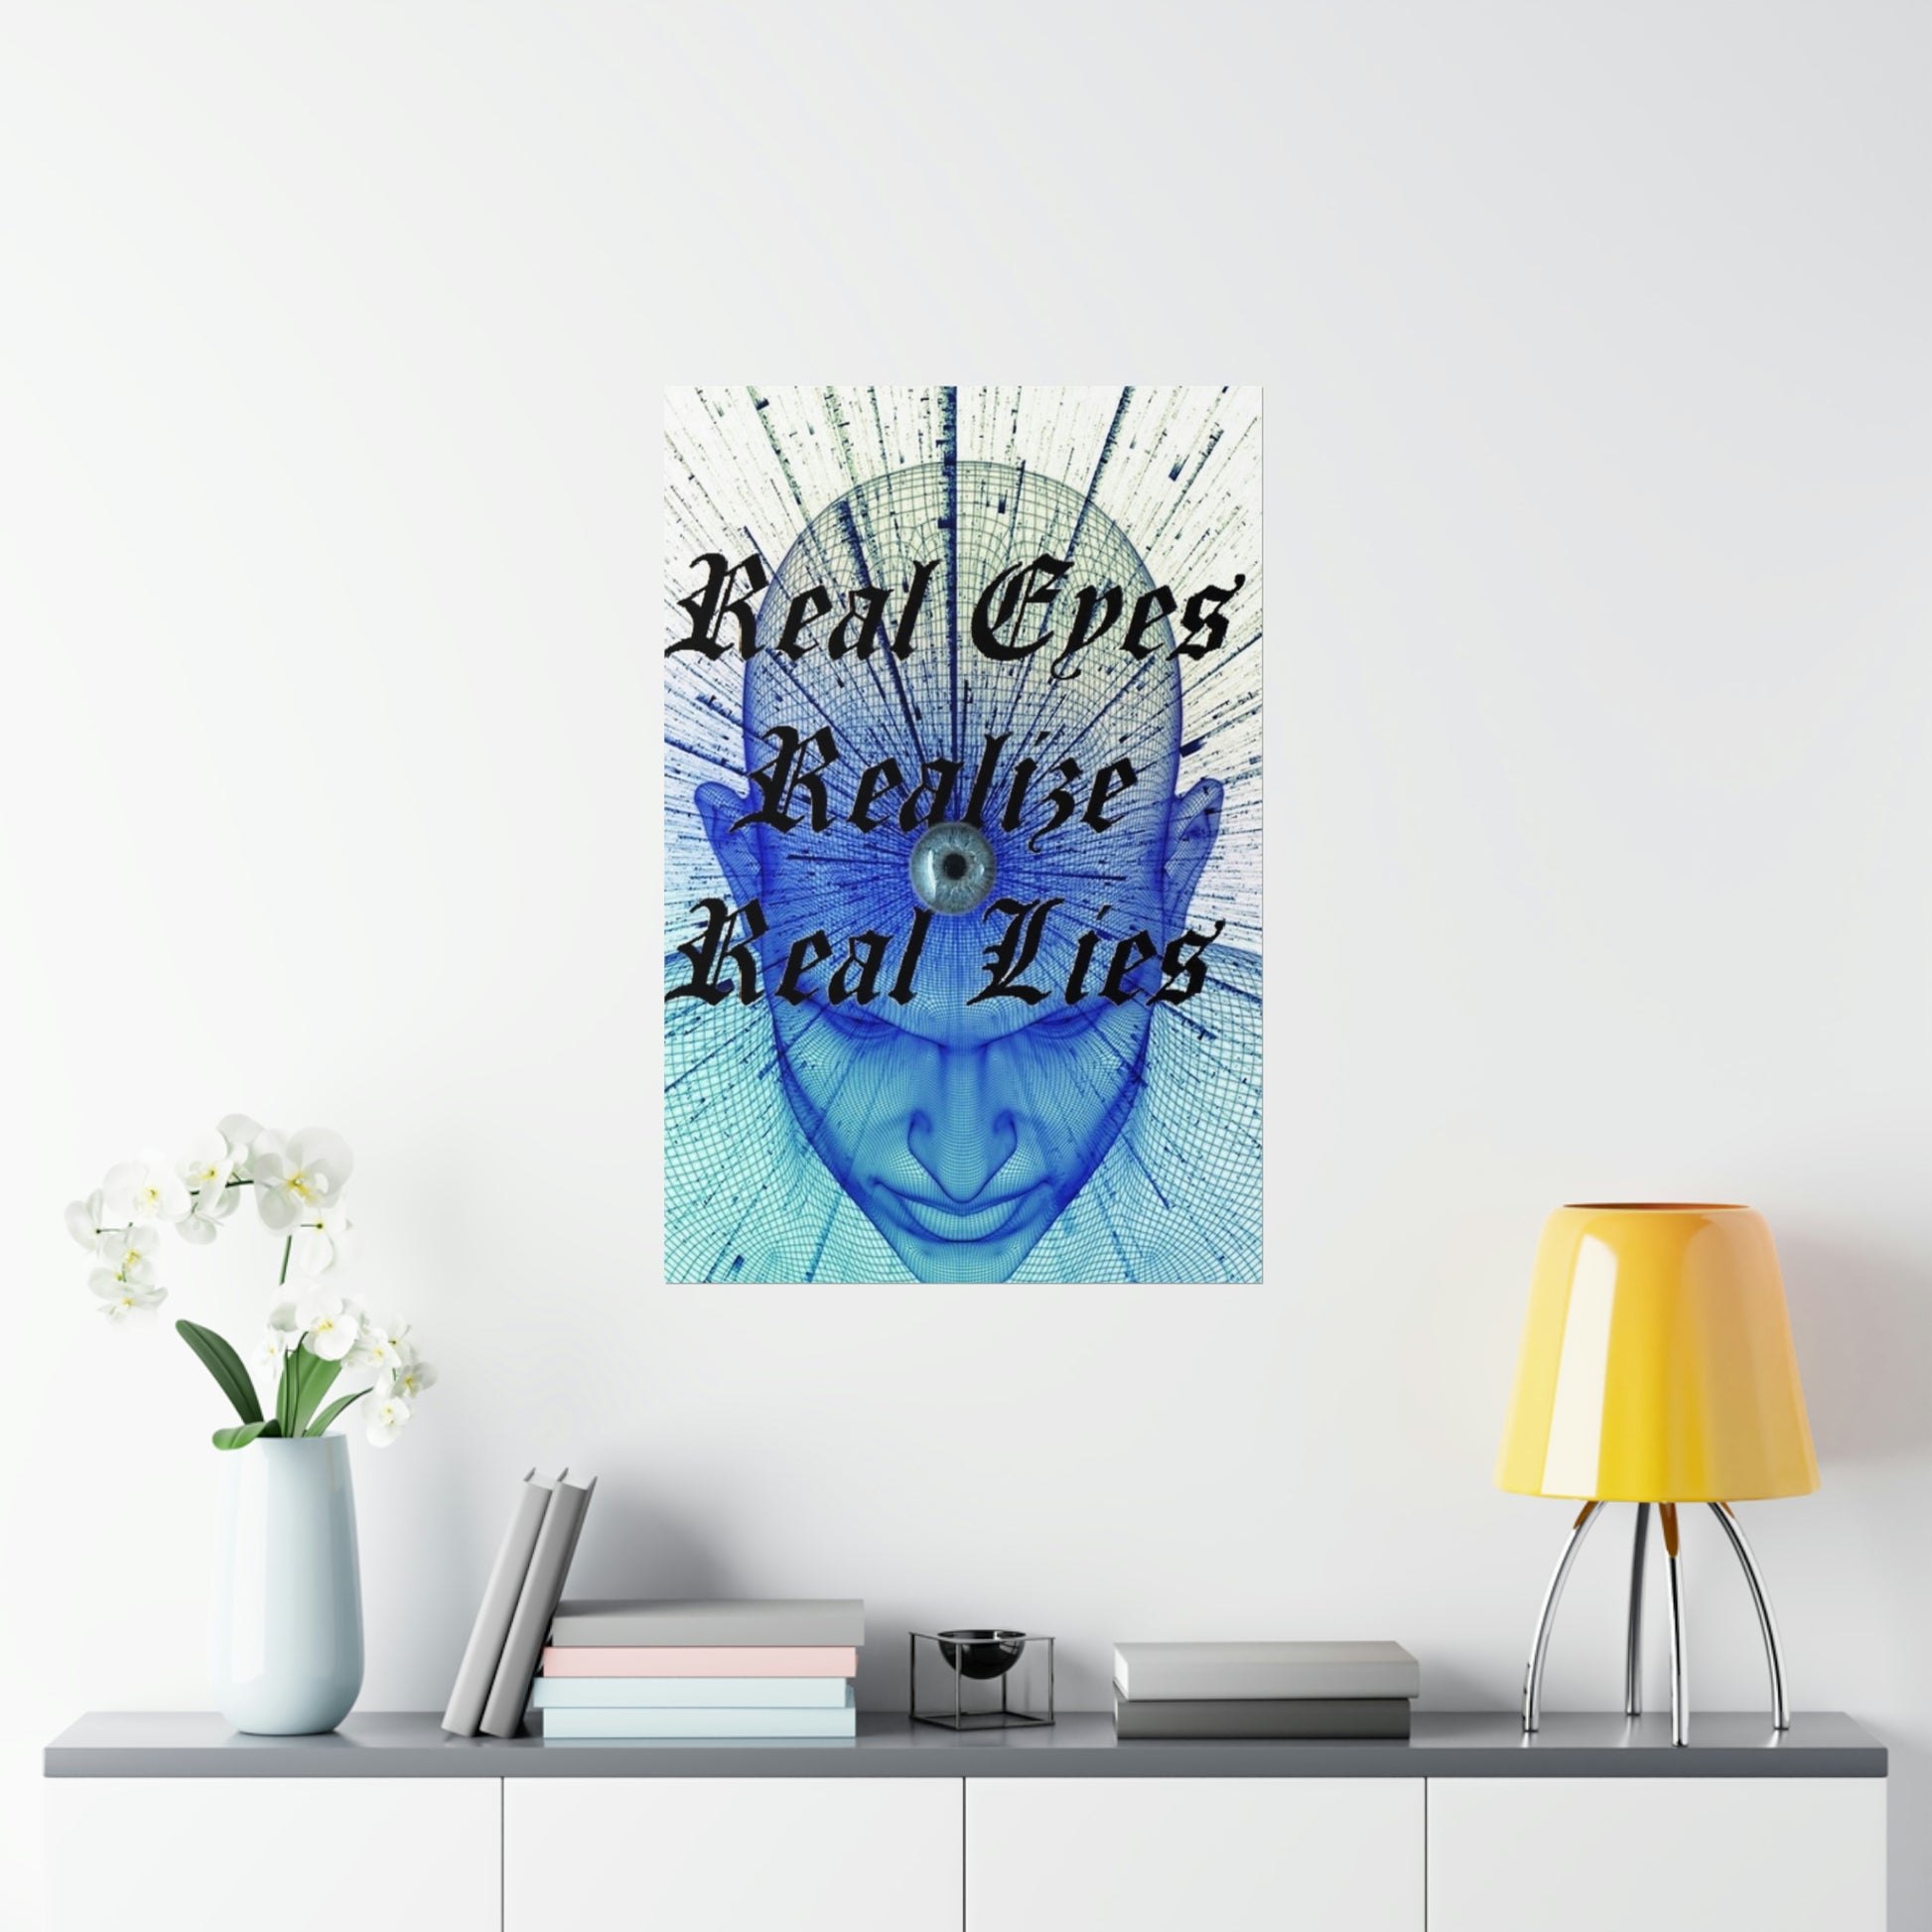 Real Eyes Realize Real Lies Poster